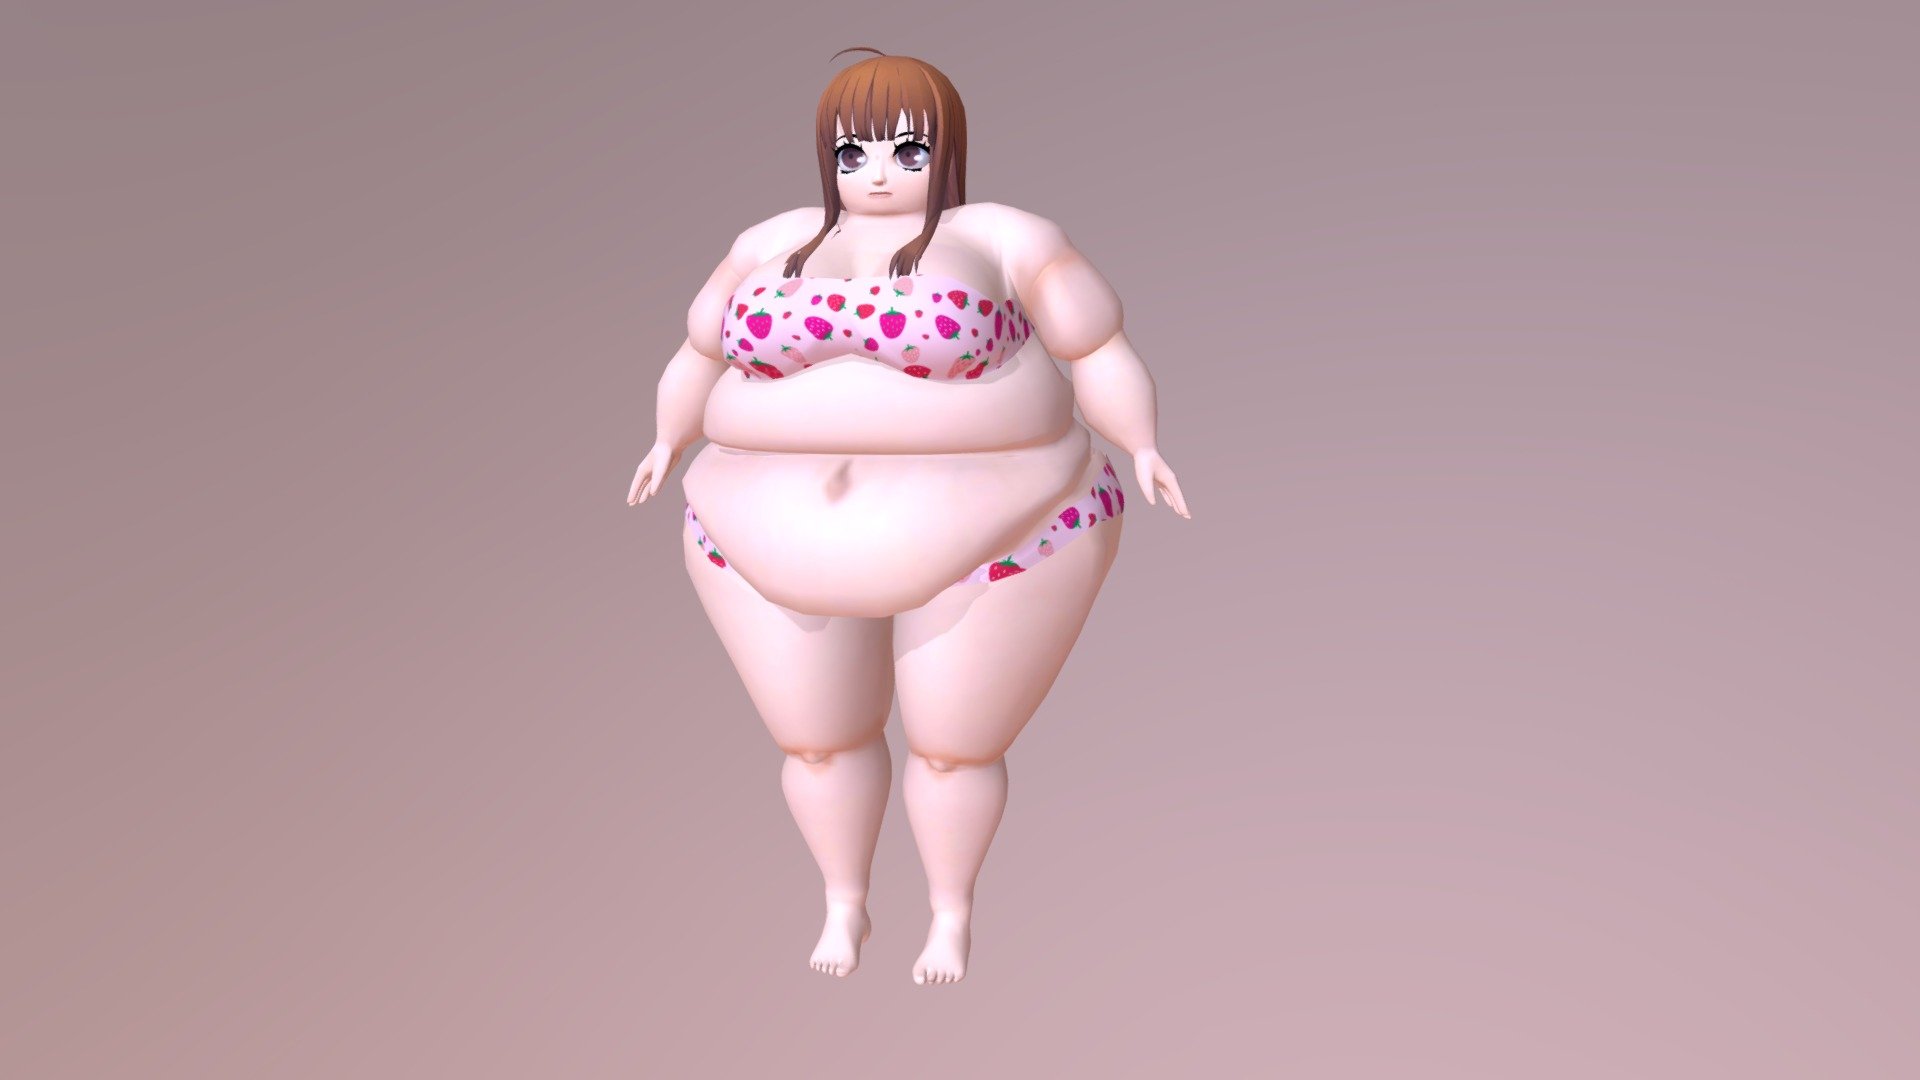 A fattened version of Futaba Sakura that could be used for modding. If you're interested in that, message me on this site, DeviantArt, Twitter 3d model